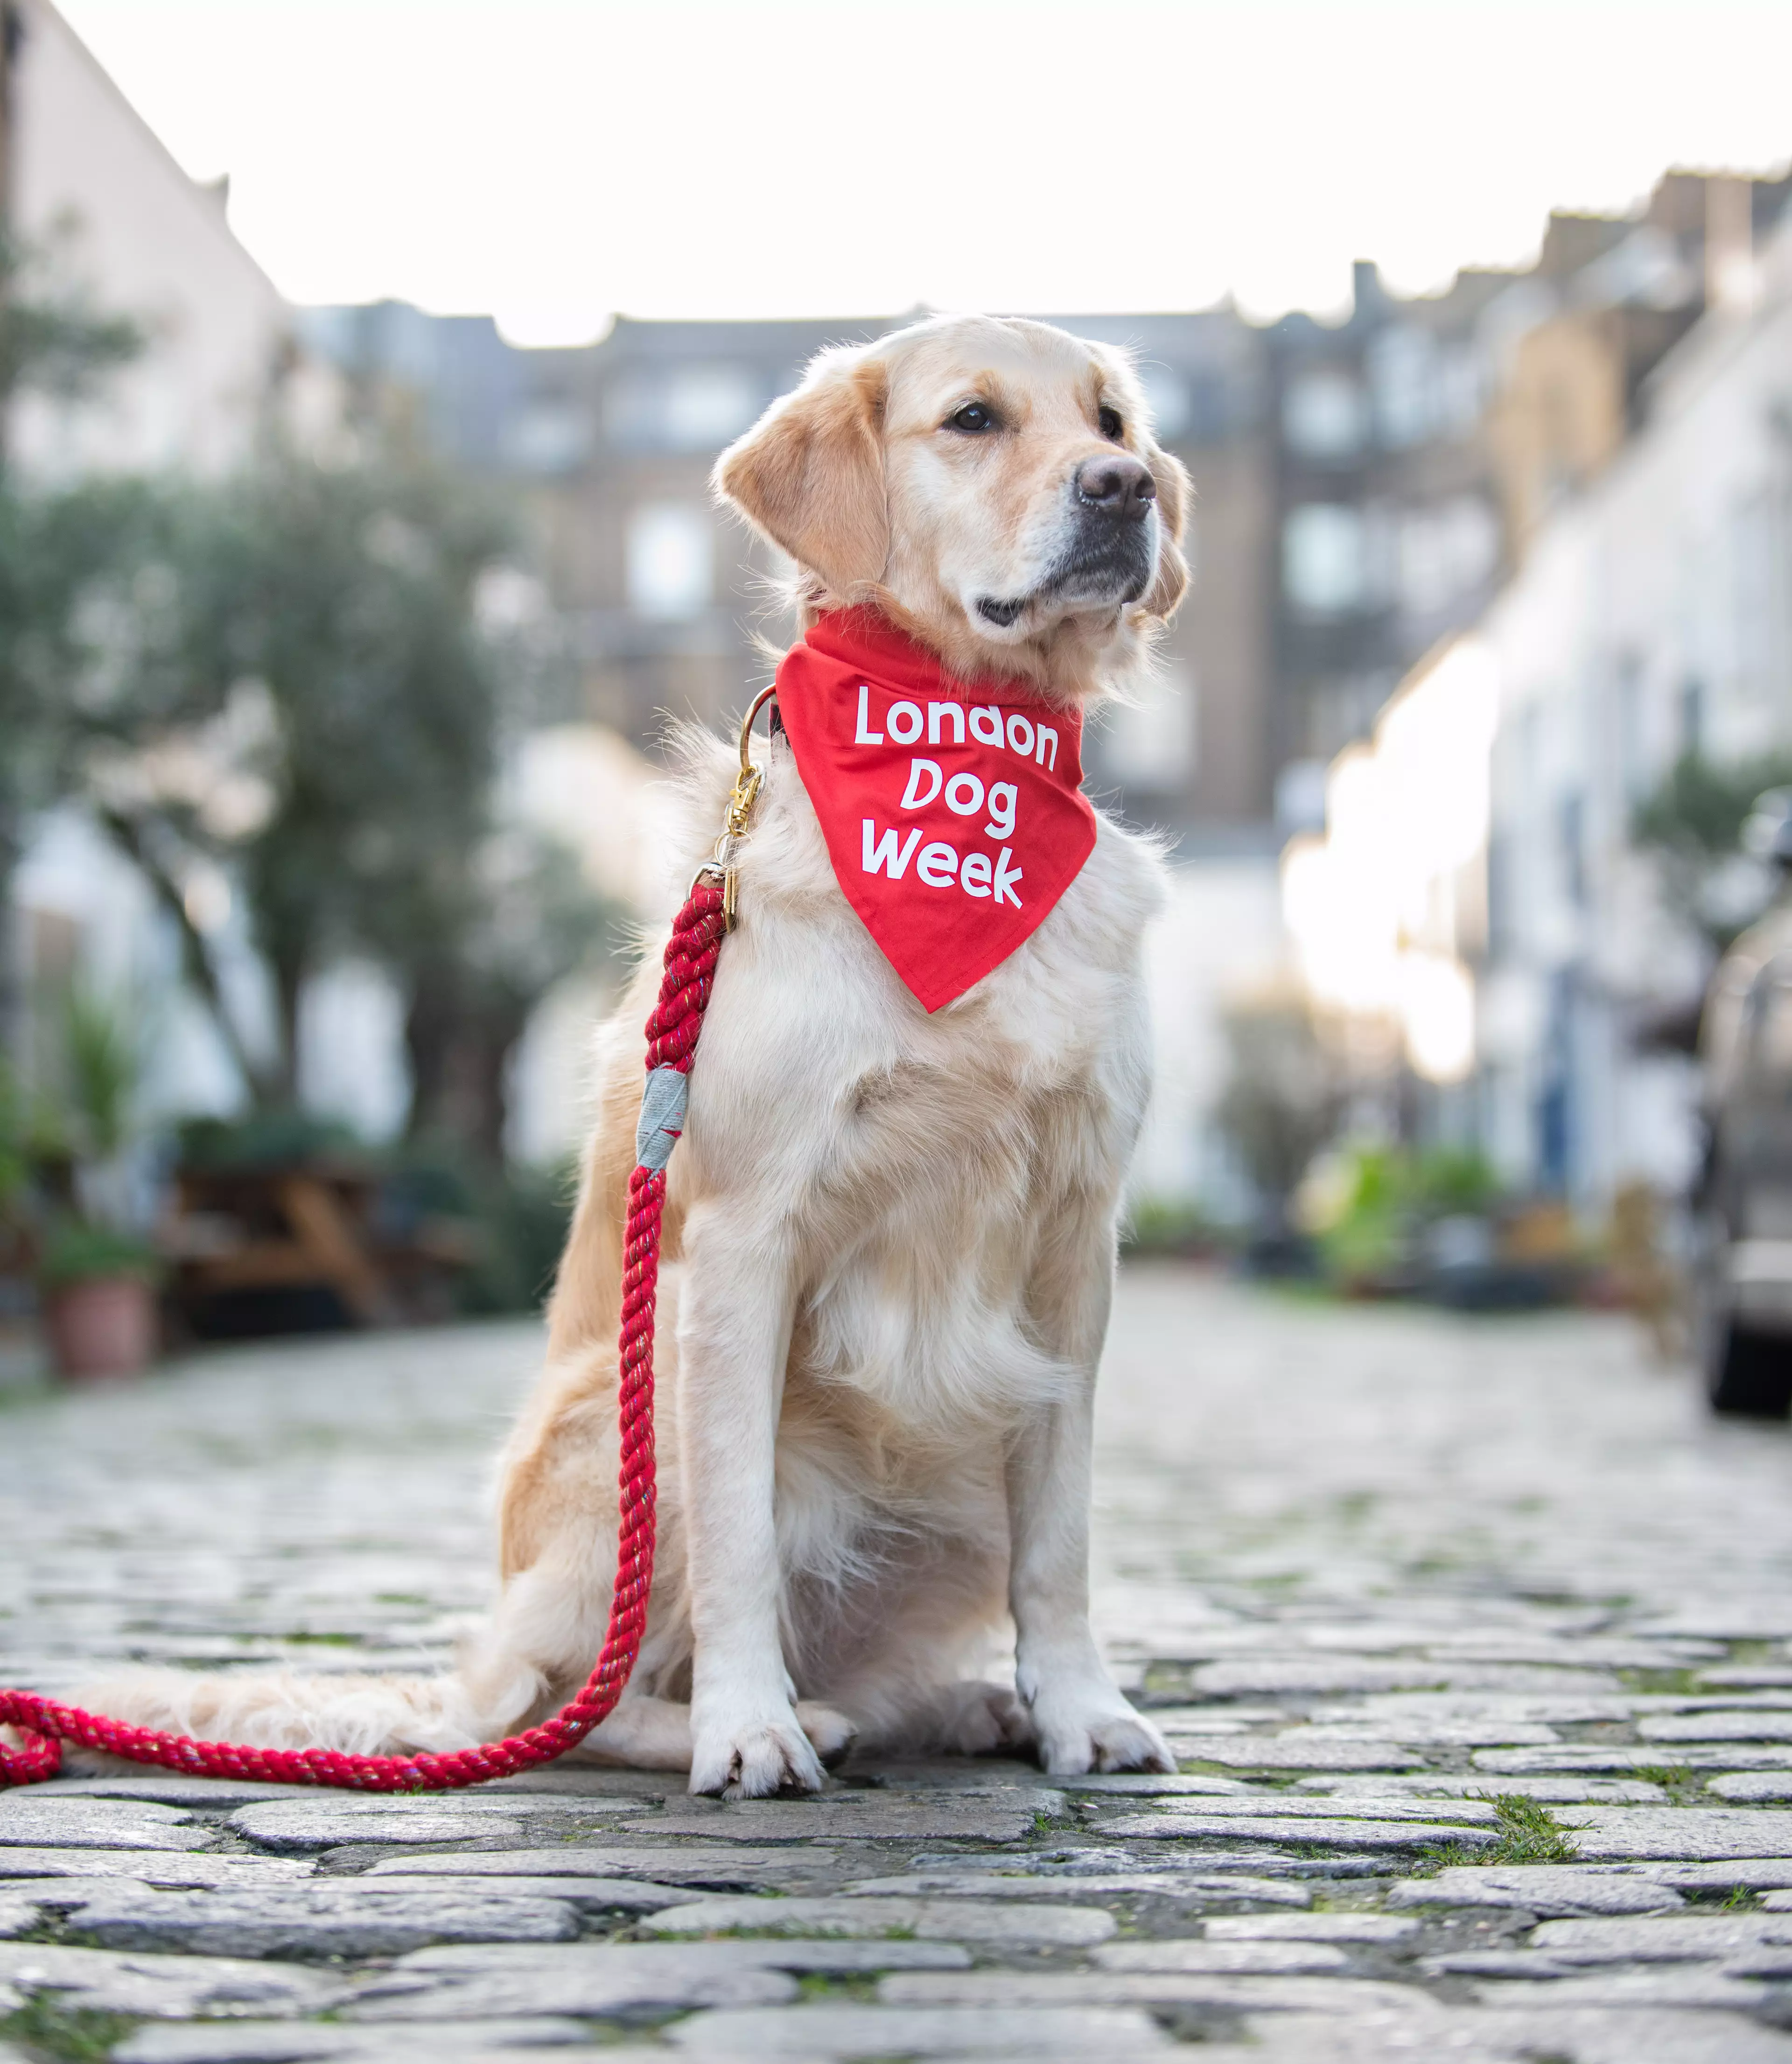 It's unsurprising that these fur babies bring us so much happiness - something London Dog Week seeks to raise awareness of (